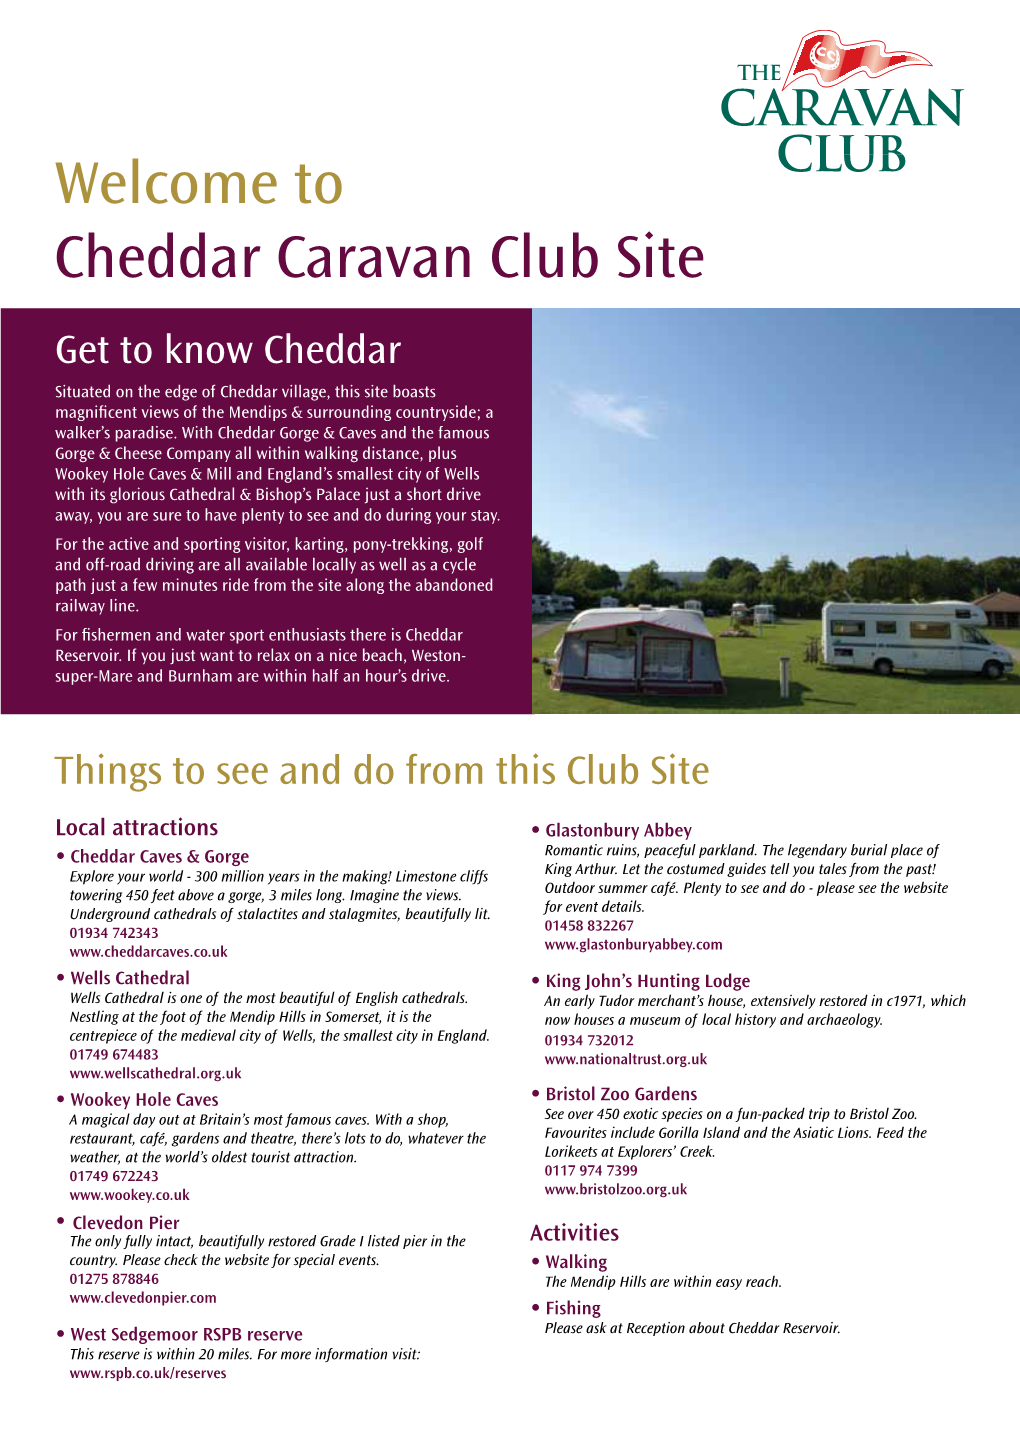 Welcome to Cheddar Caravan Club Site